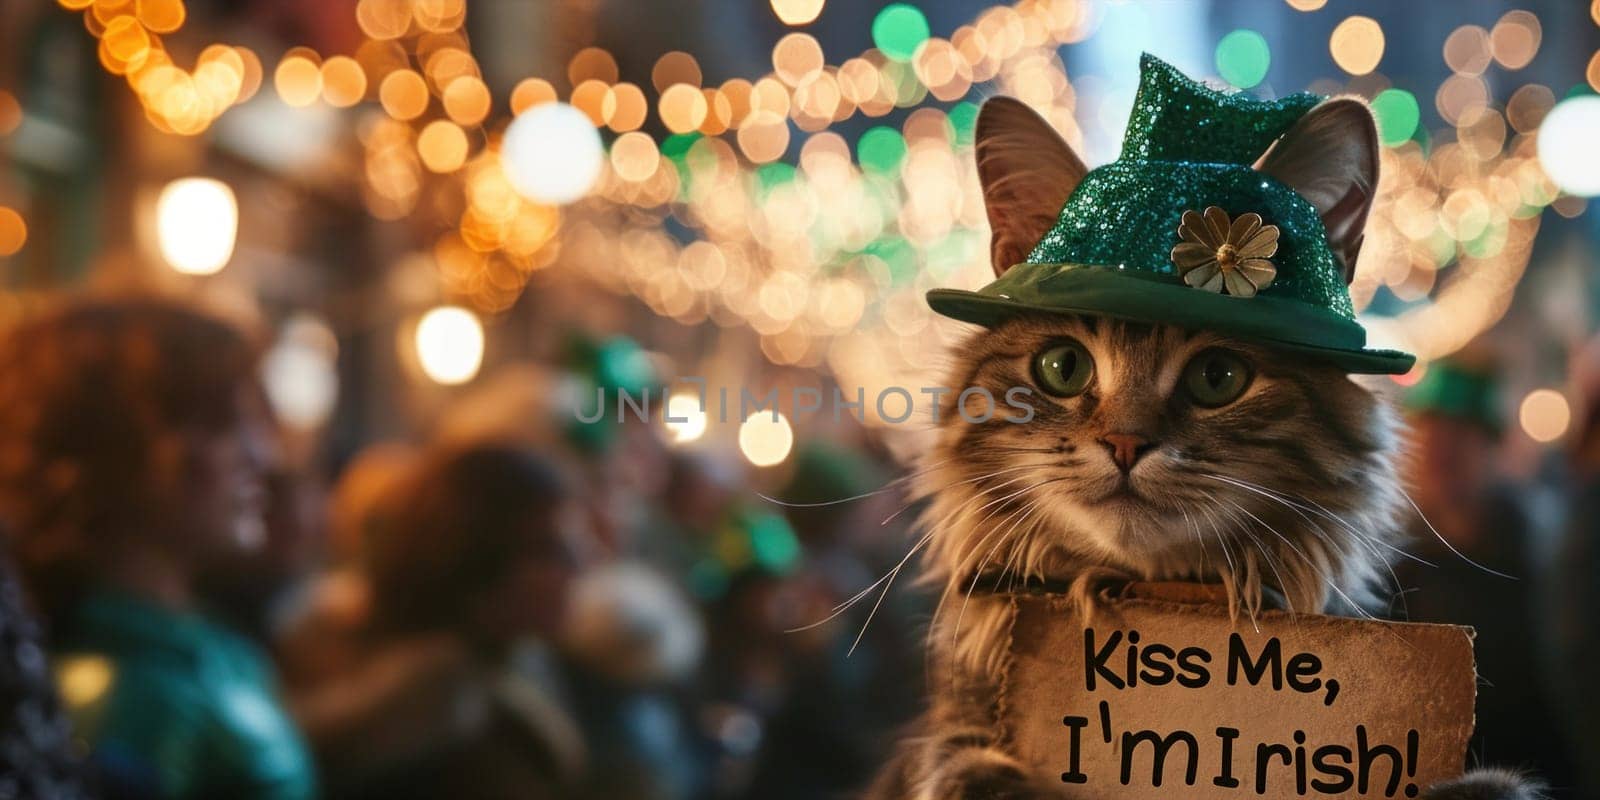 A cat wearing a green hat with the words kiss me i'm irish